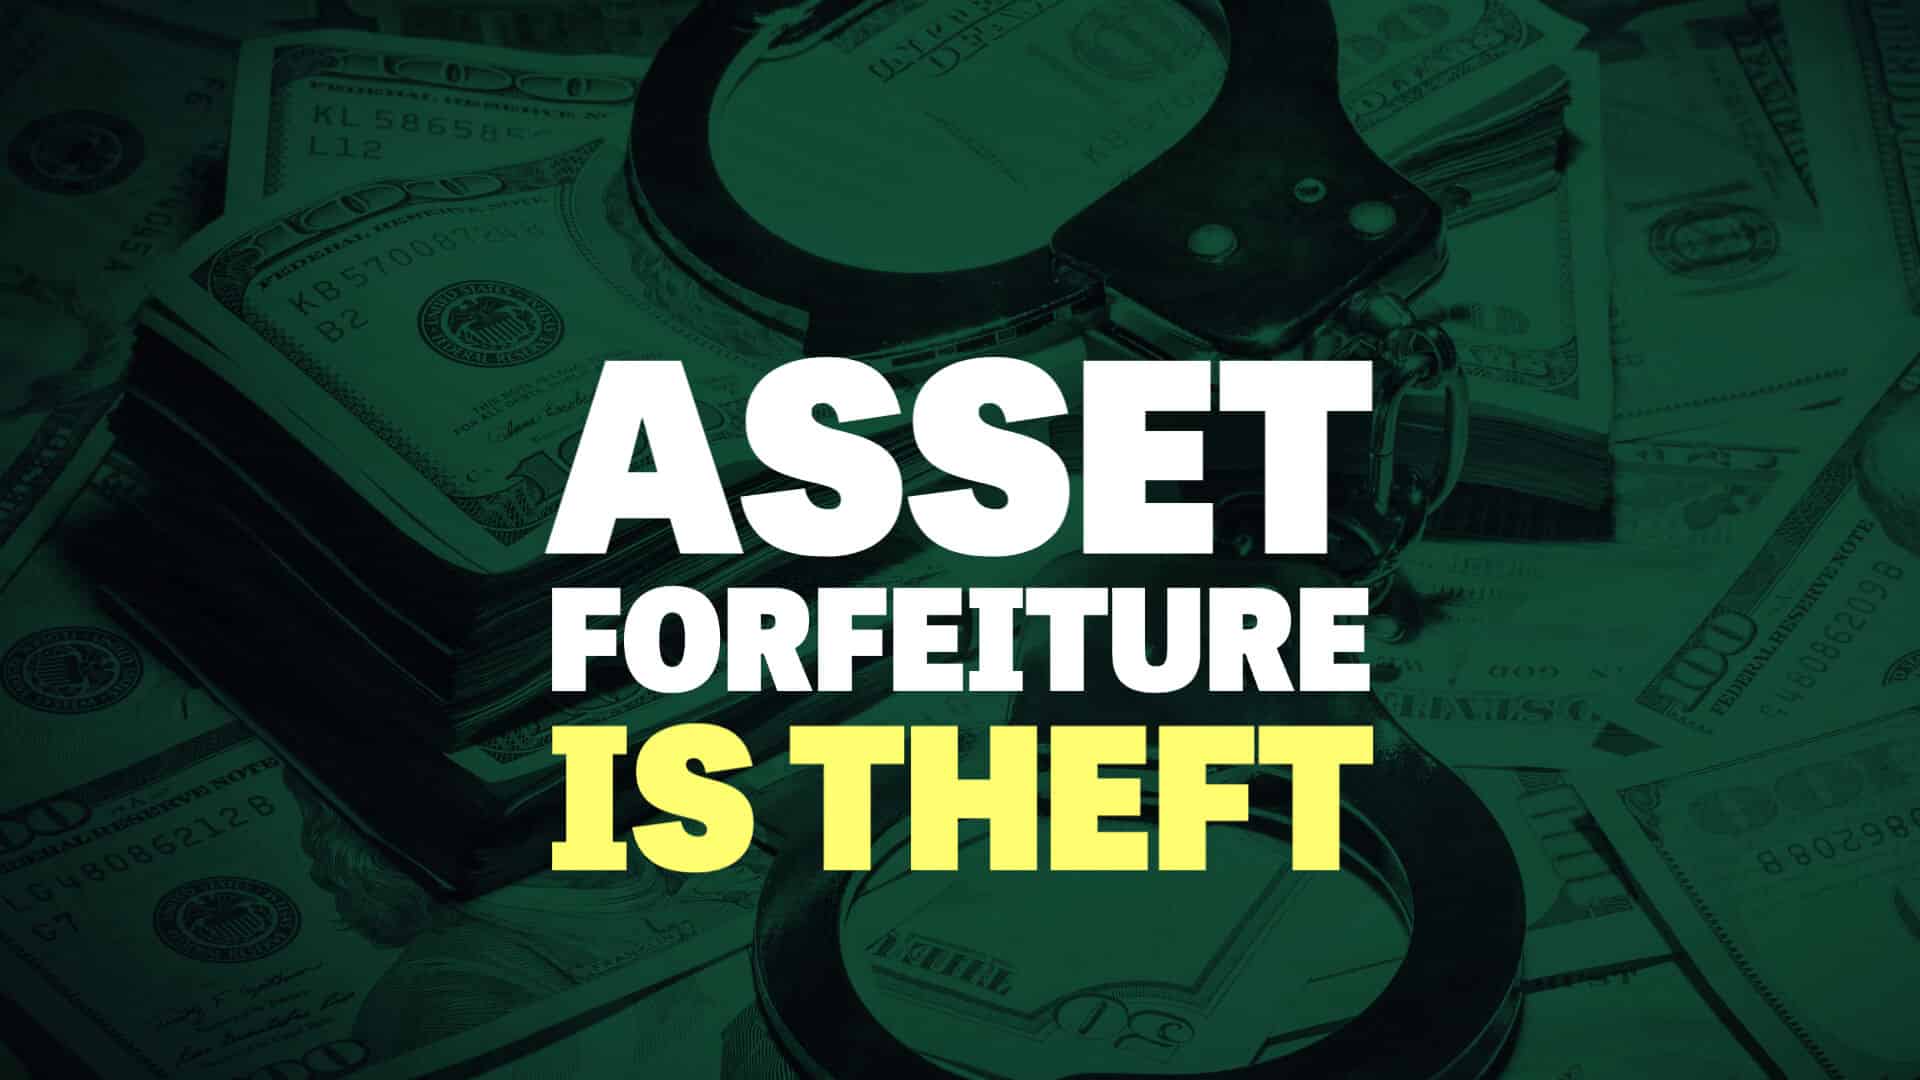 Asset Forfeiture is Theft